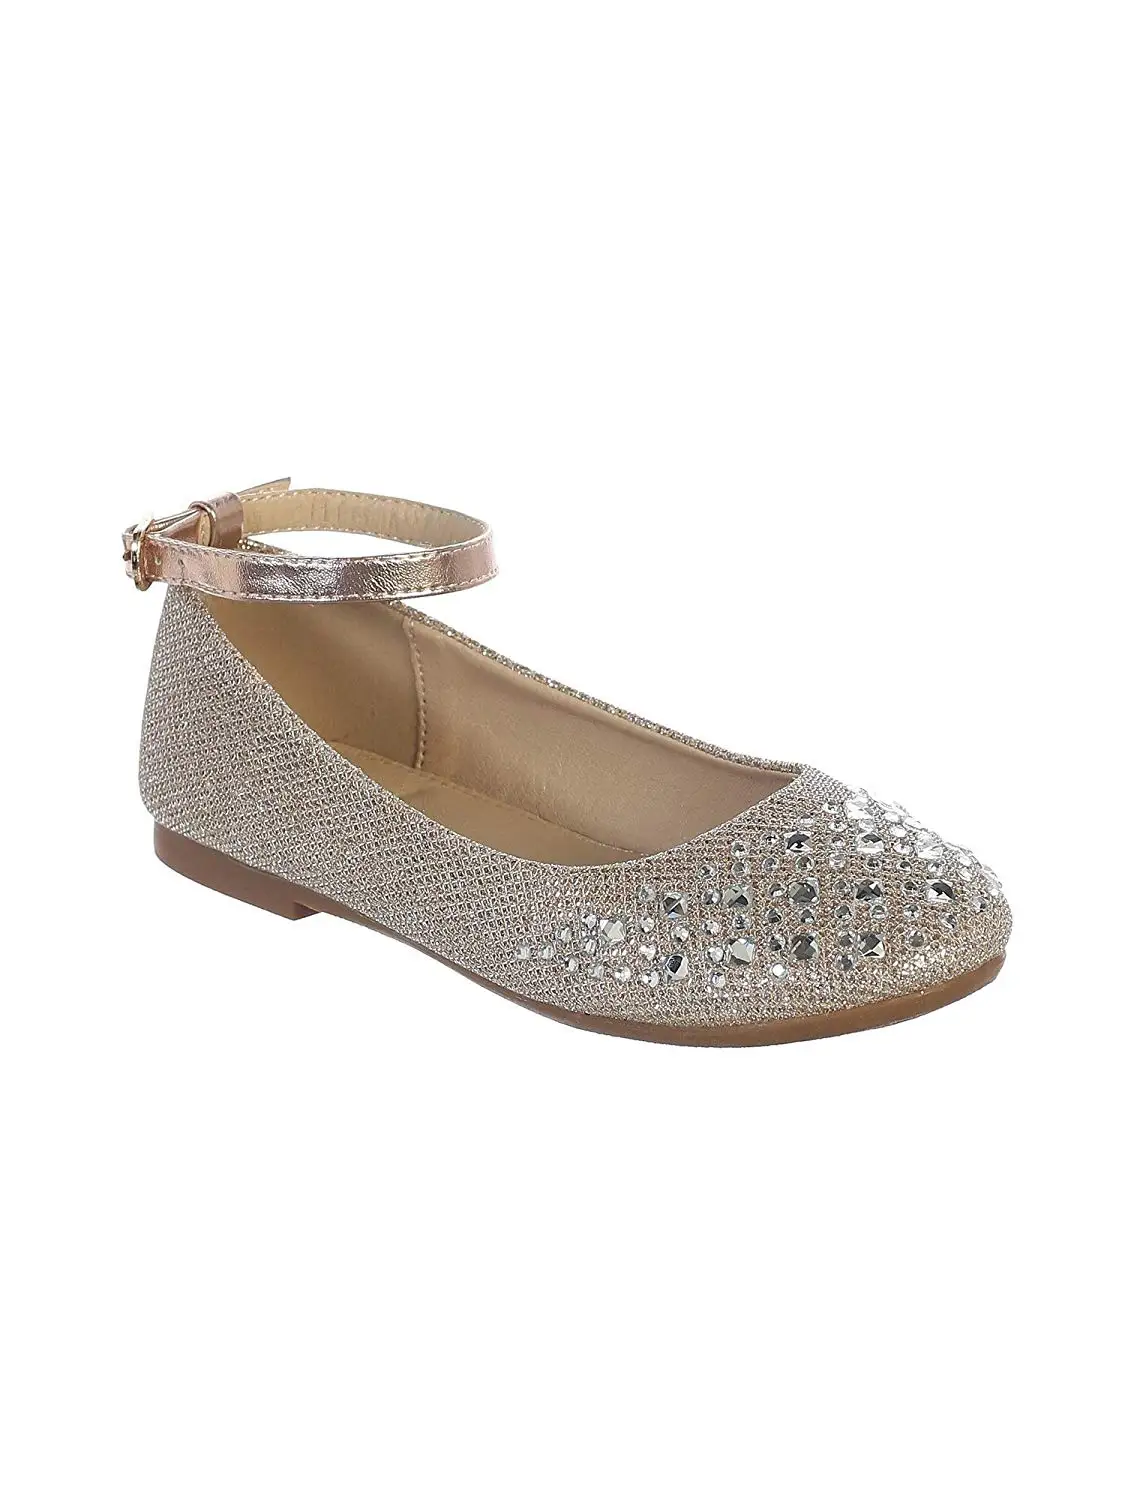 Cheap Girls Gold Sparkle Shoes, find Girls Gold Sparkle Shoes deals on ...